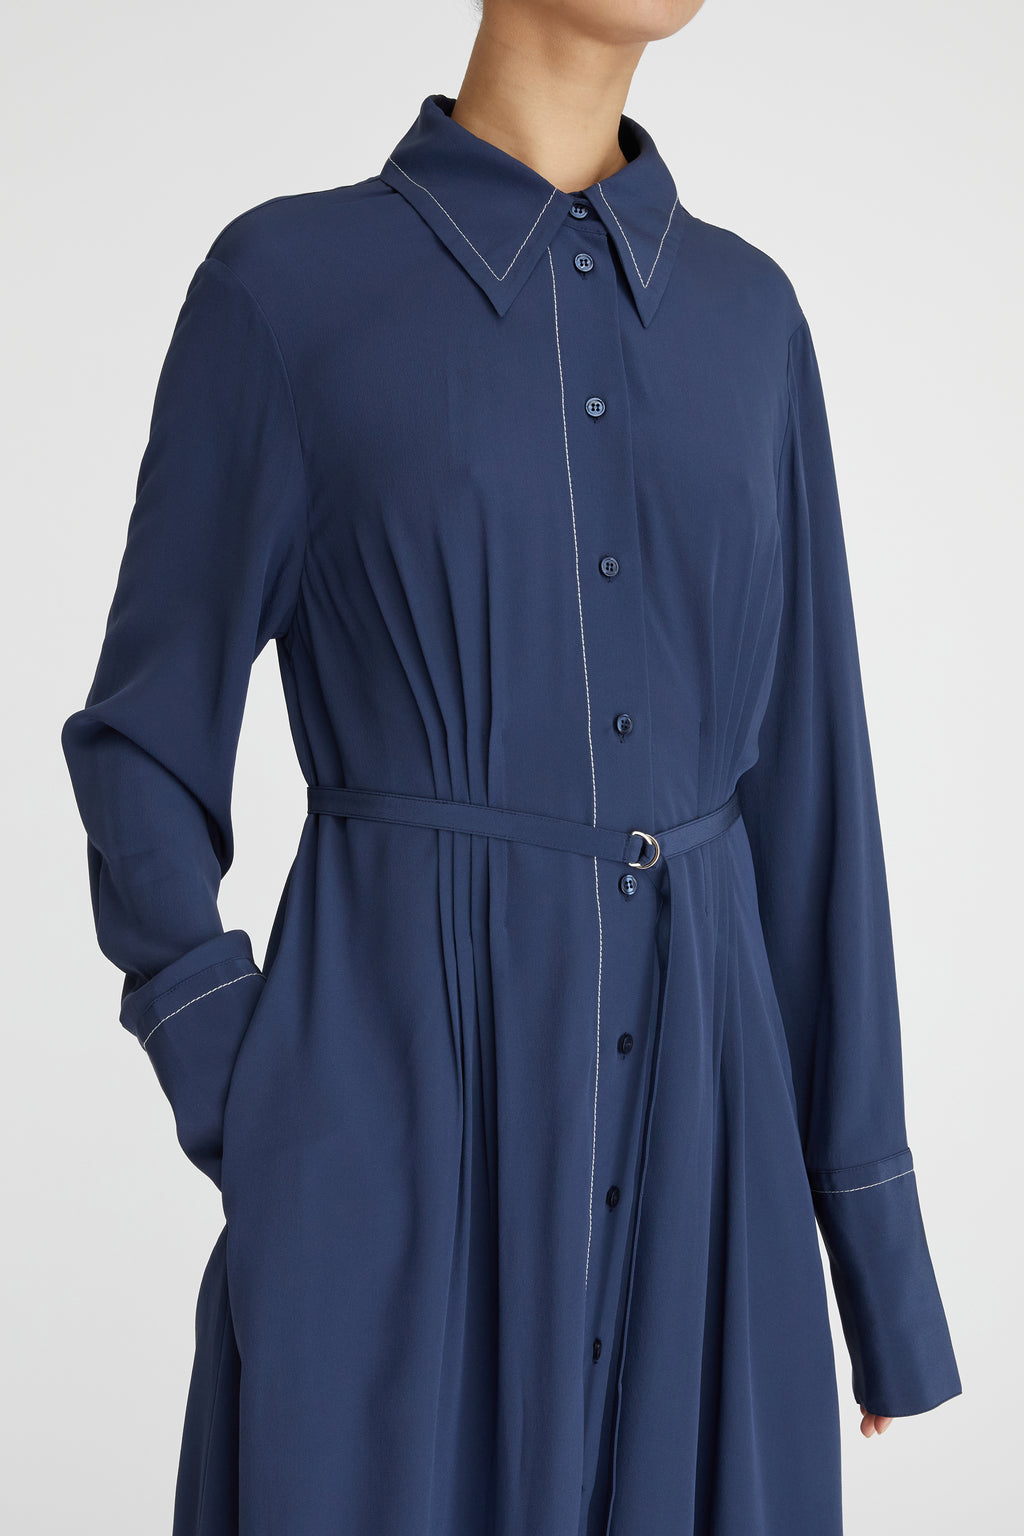 Shop the Cassini Tucked Shirtdress by Lee Mathews